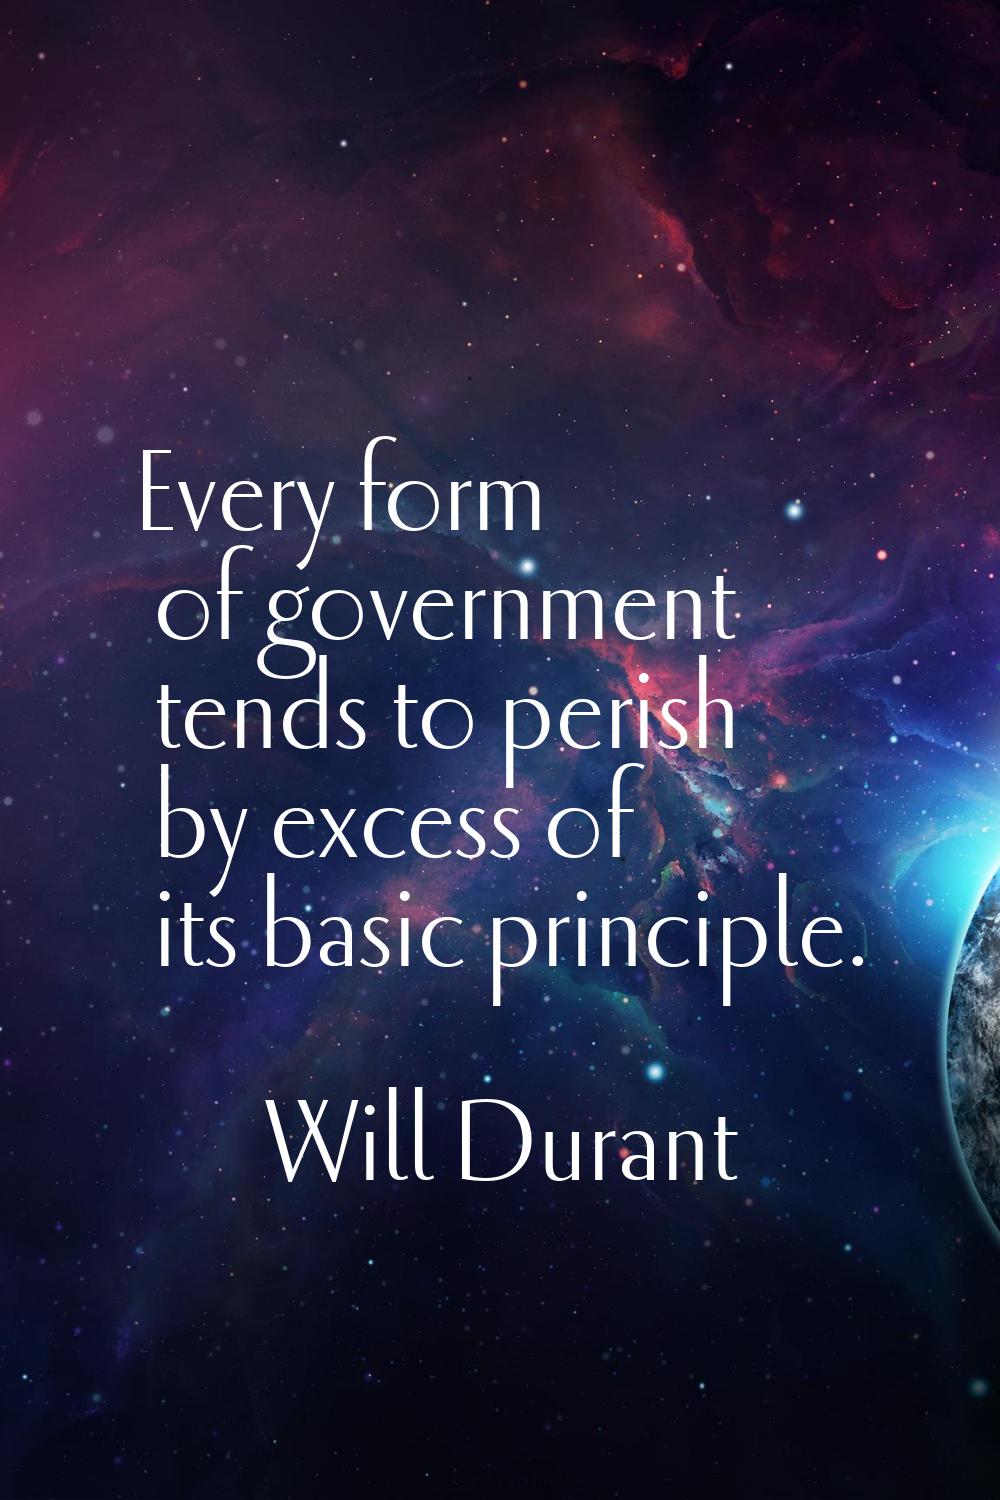 Every form of government tends to perish by excess of its basic principle.